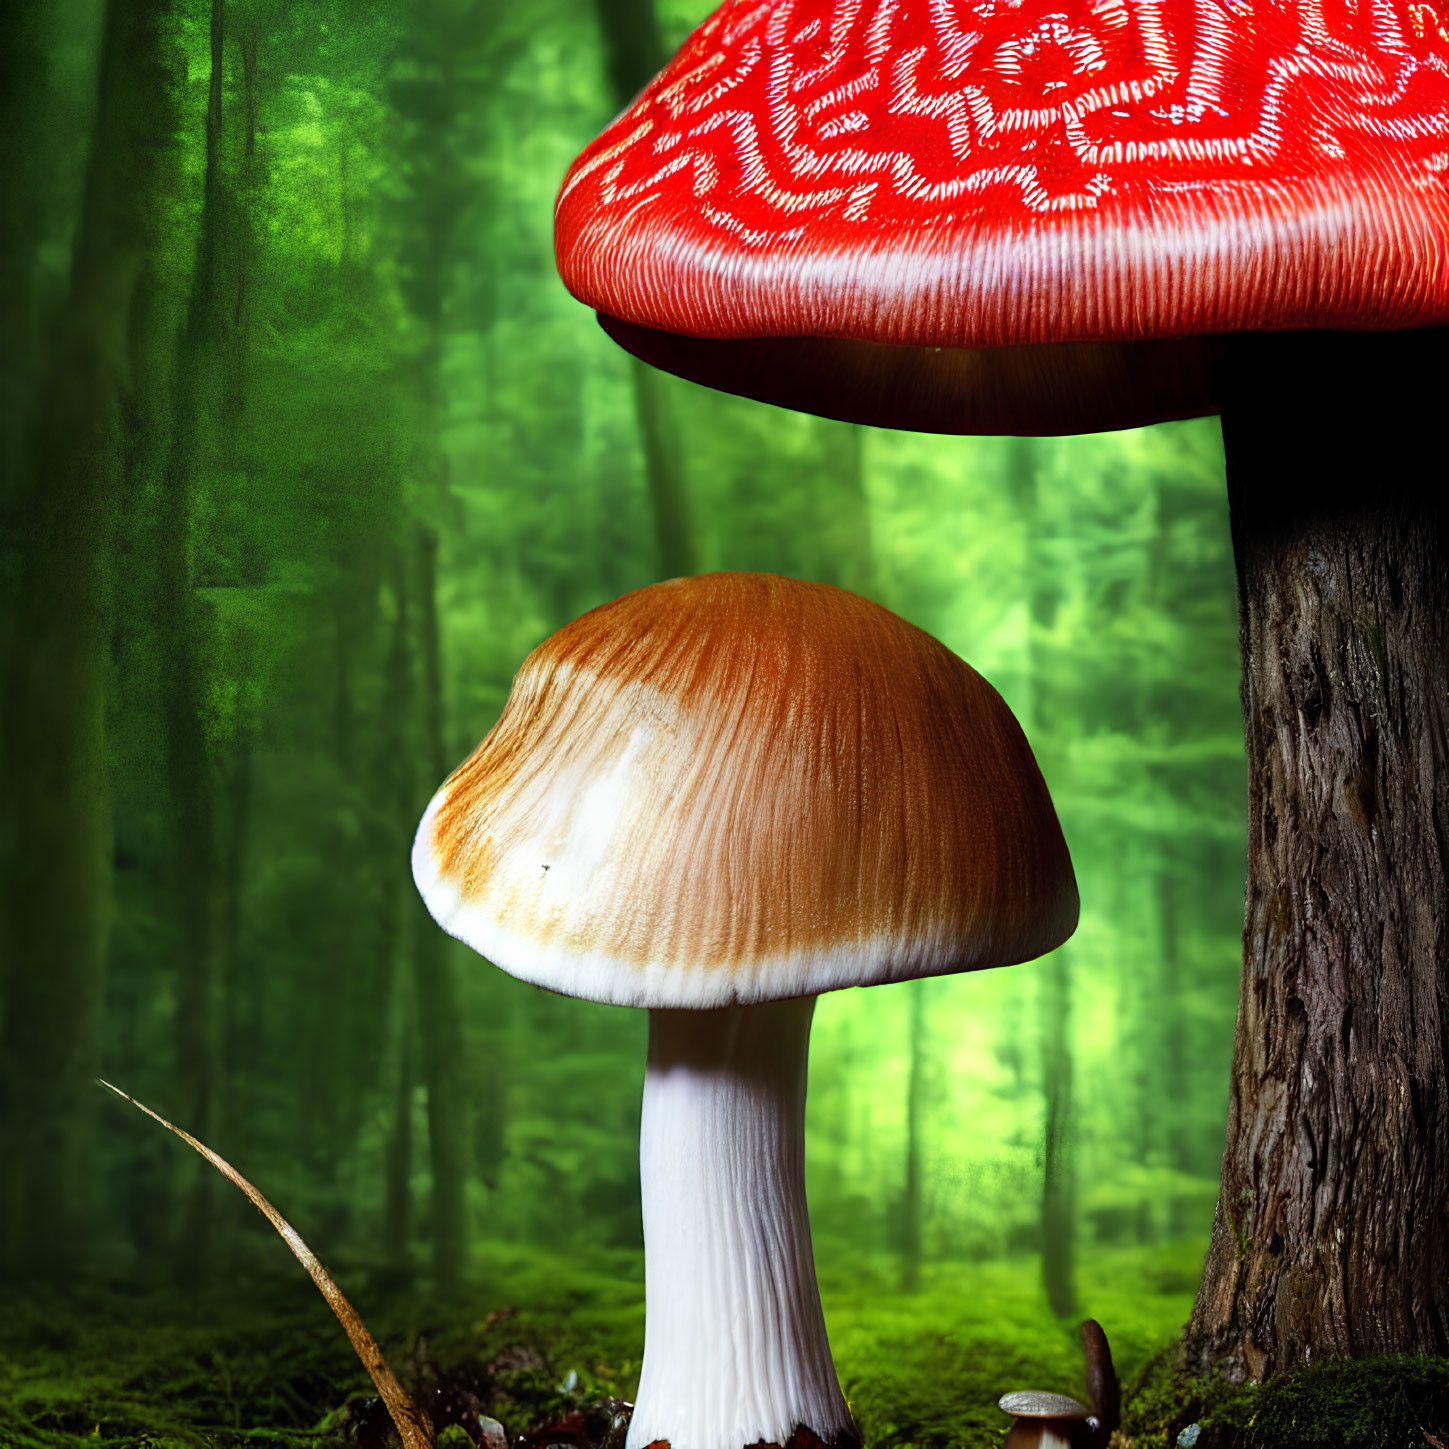 Red-Capped Mushroom Towering Over Smaller Brown Mushroom in Lush Forest